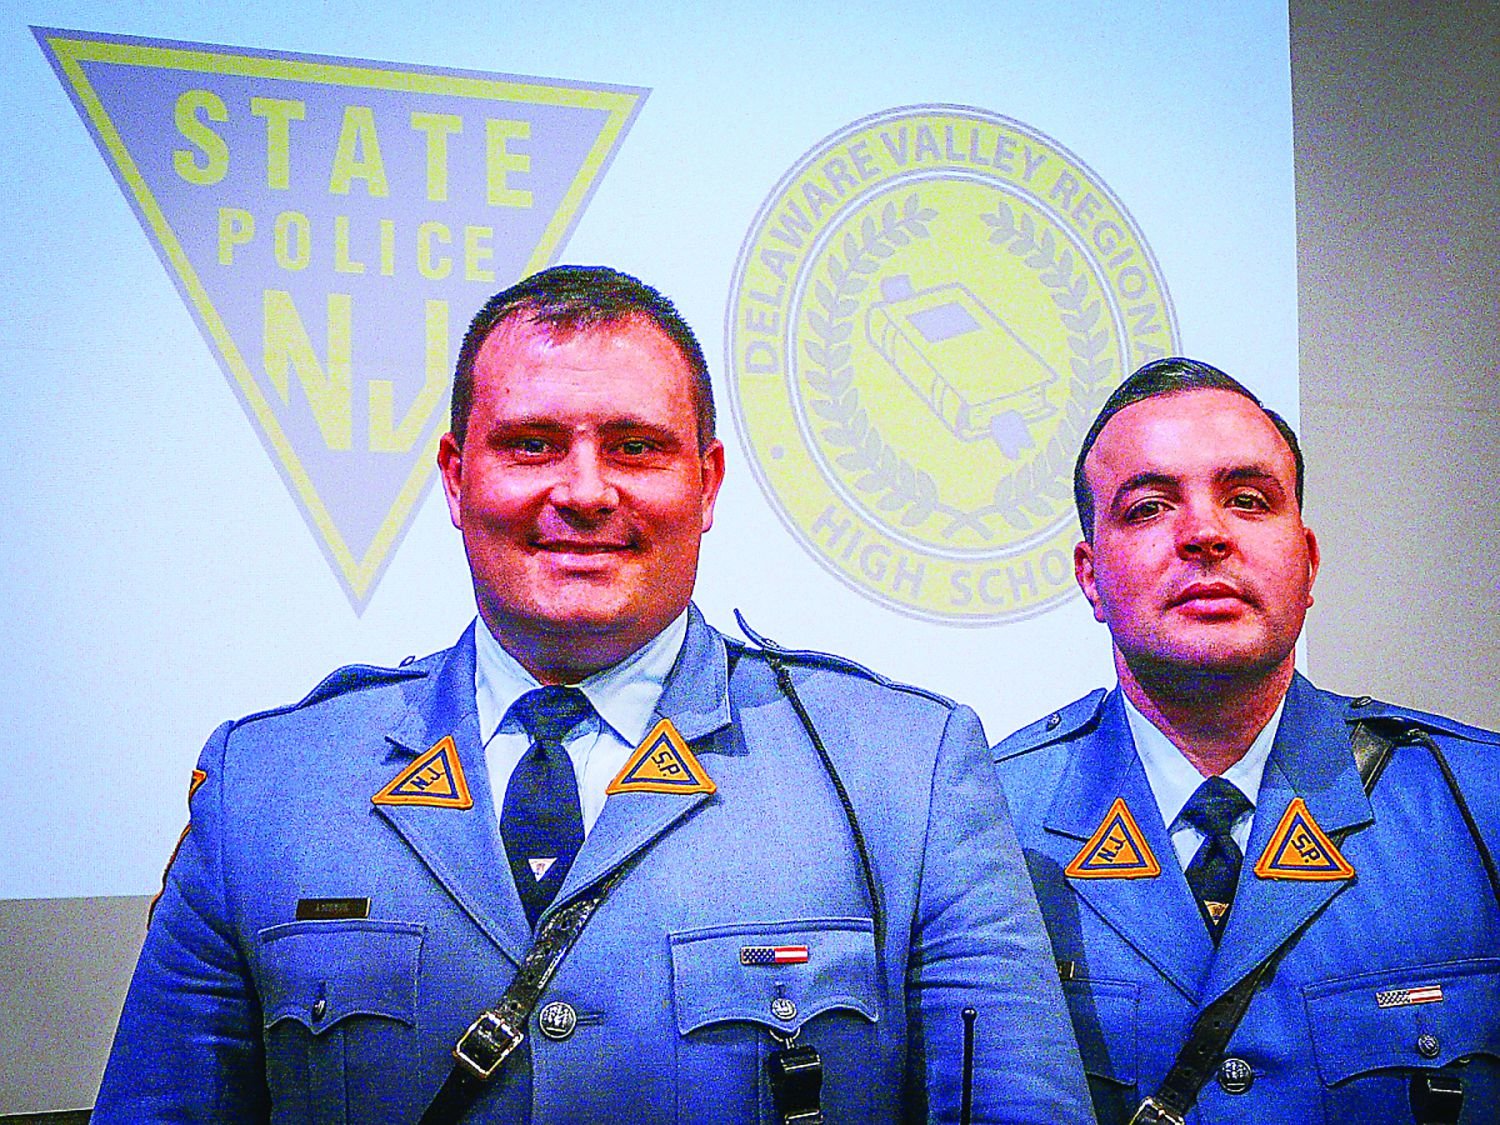 State Troopers Joe Seidler, left, and Mike Guenther made the case against opioid use in a marathon session with Delaware Valley High School upperclassmen.